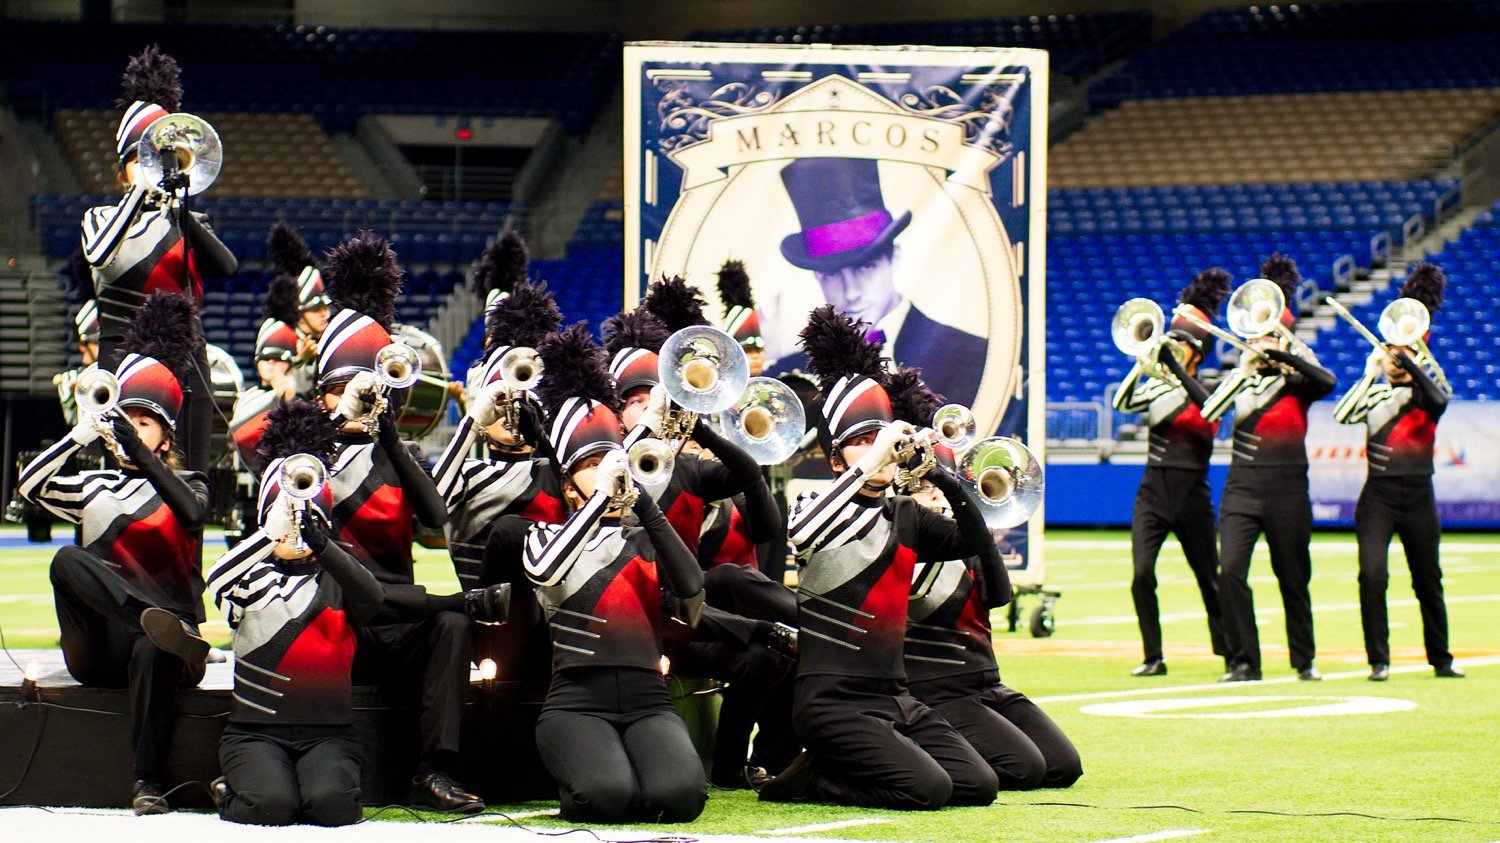 Winnsboro earned fifth place at the UIL state marching band championship Wednesday in San Antonio.